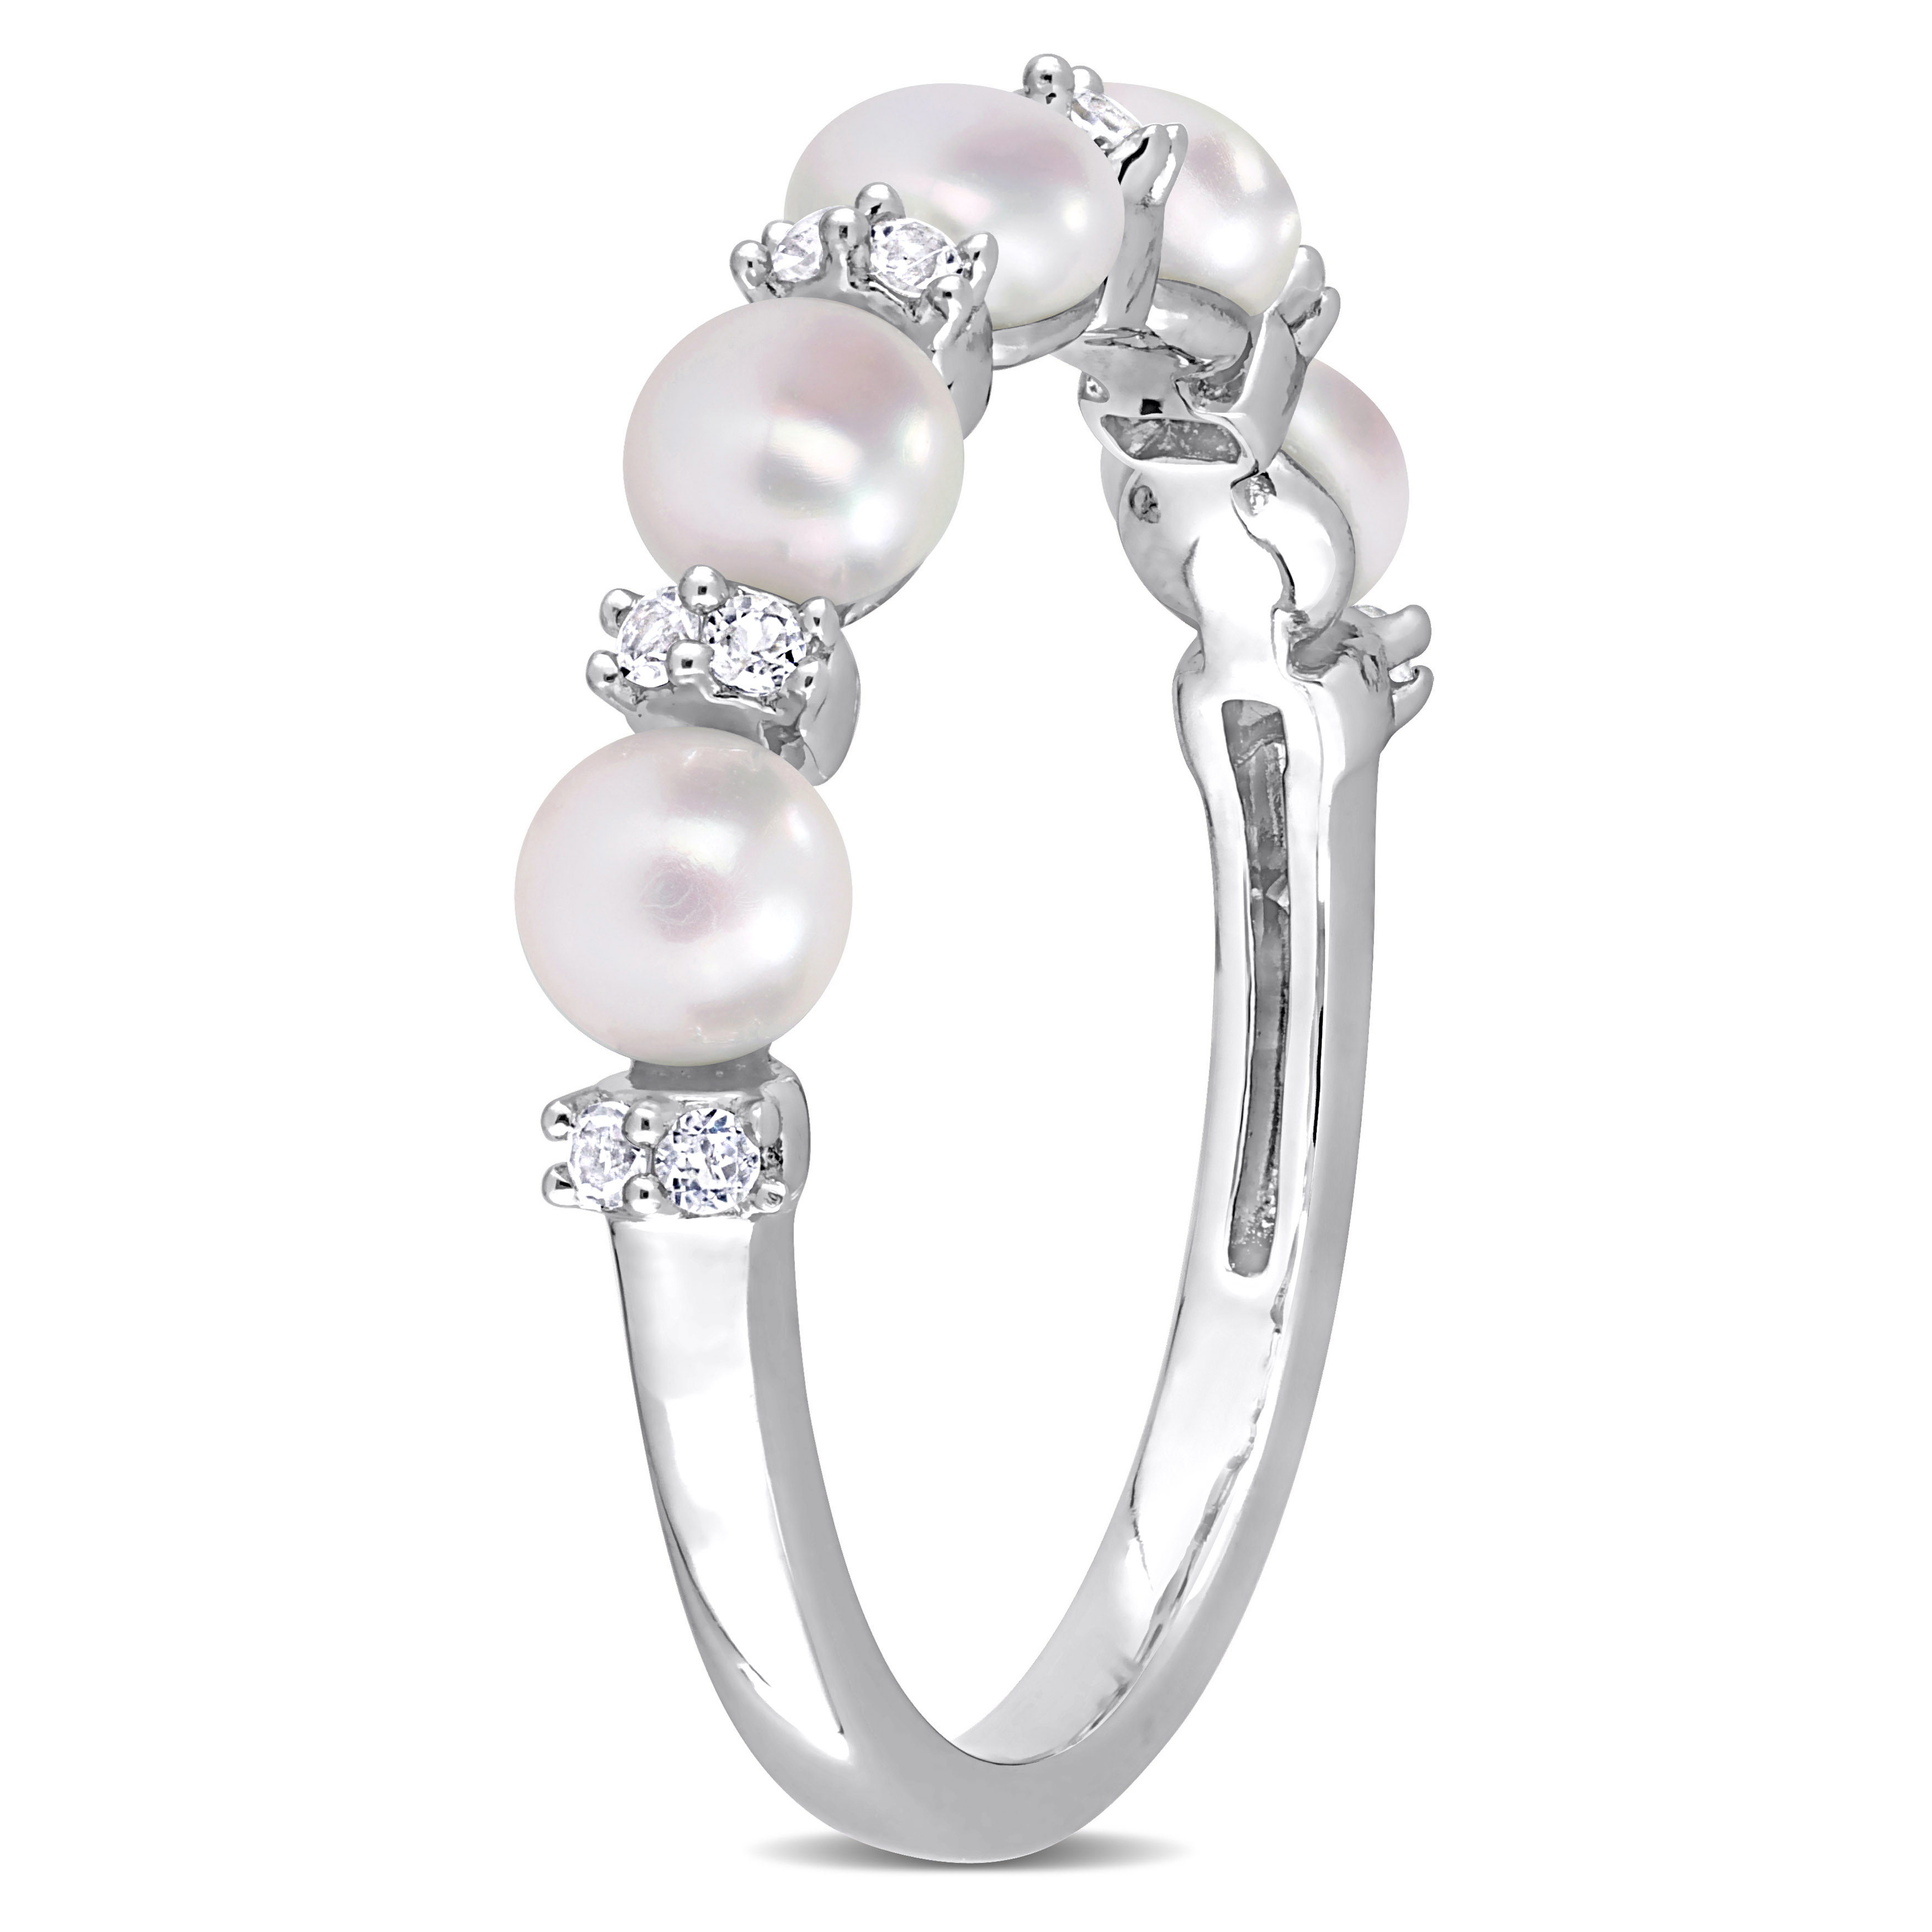 3.5-4 MM Cultured Freshwater Pearl and 1/8 CT TGW White Topaz Semi Eternity Ring in Sterling Silver